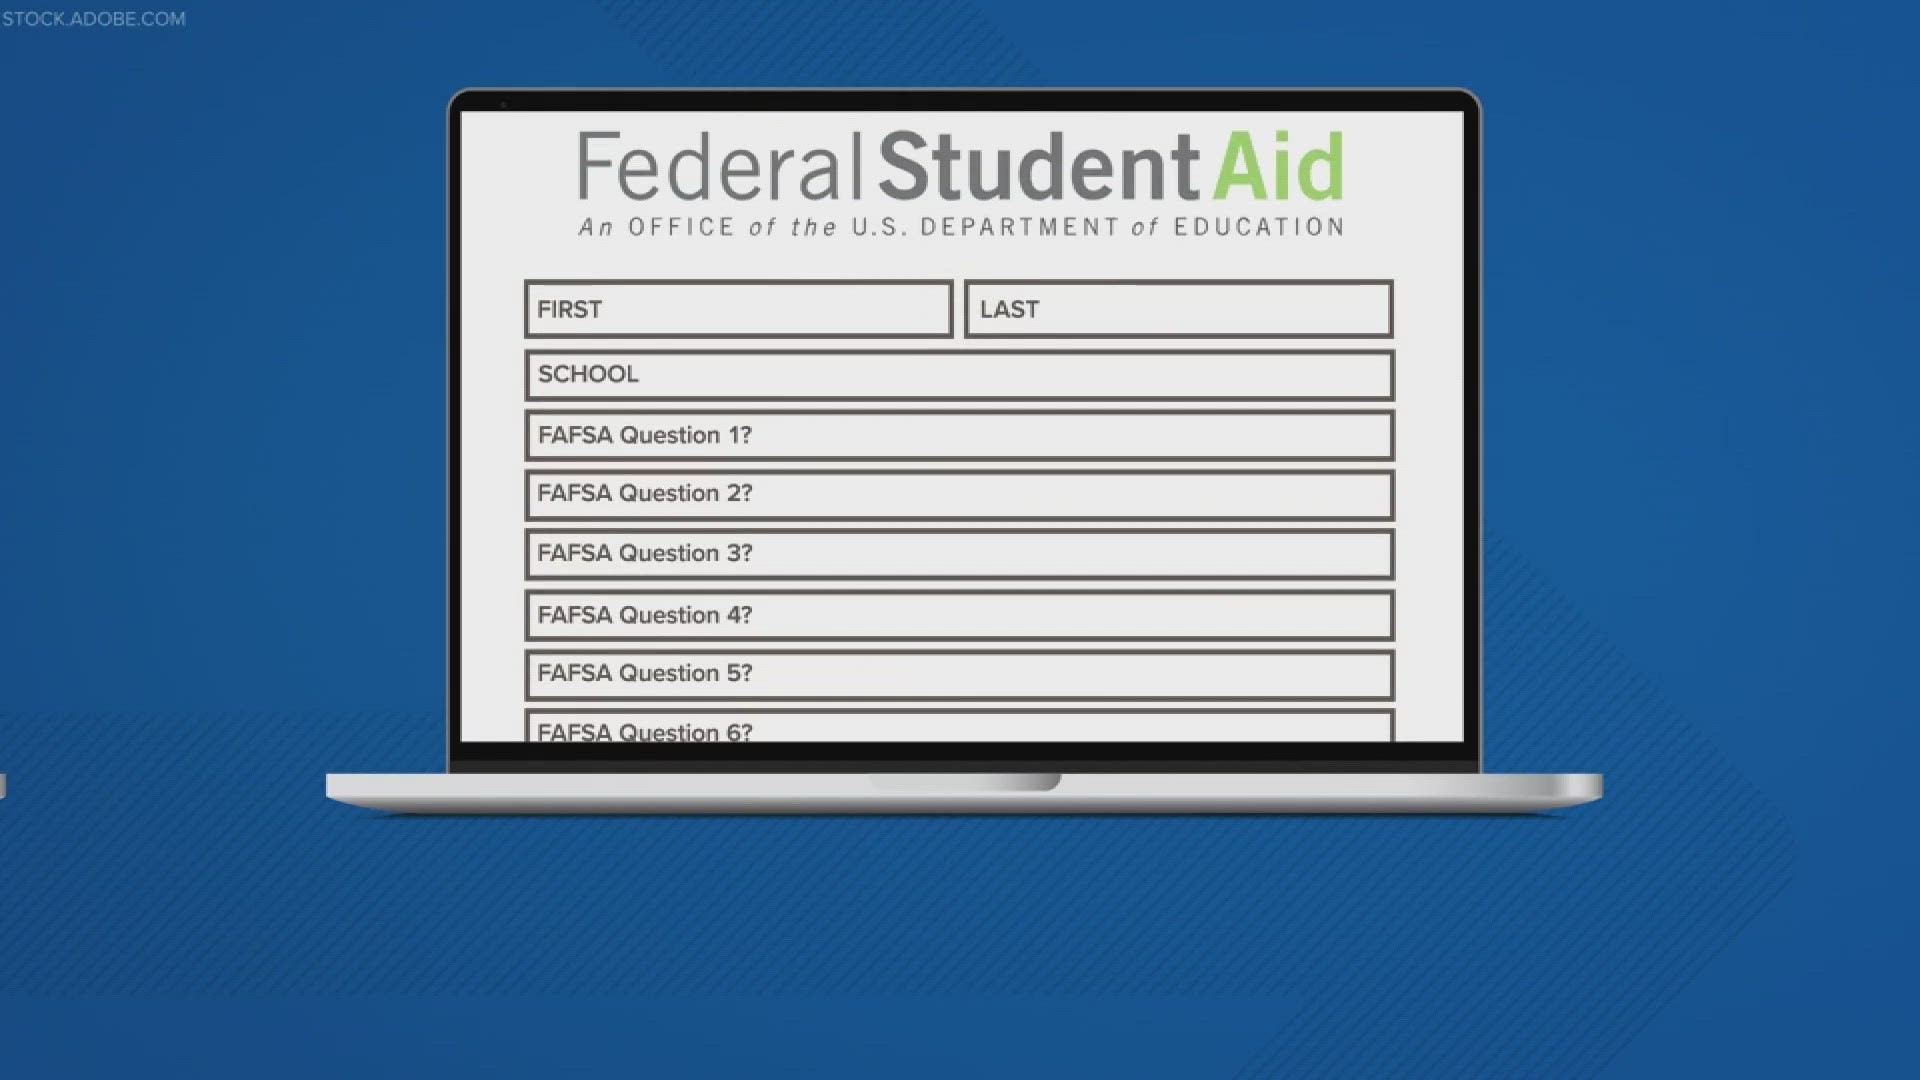 March is when colleges and universities are expected to receive 'Free Application for Federal Student Aid' results.